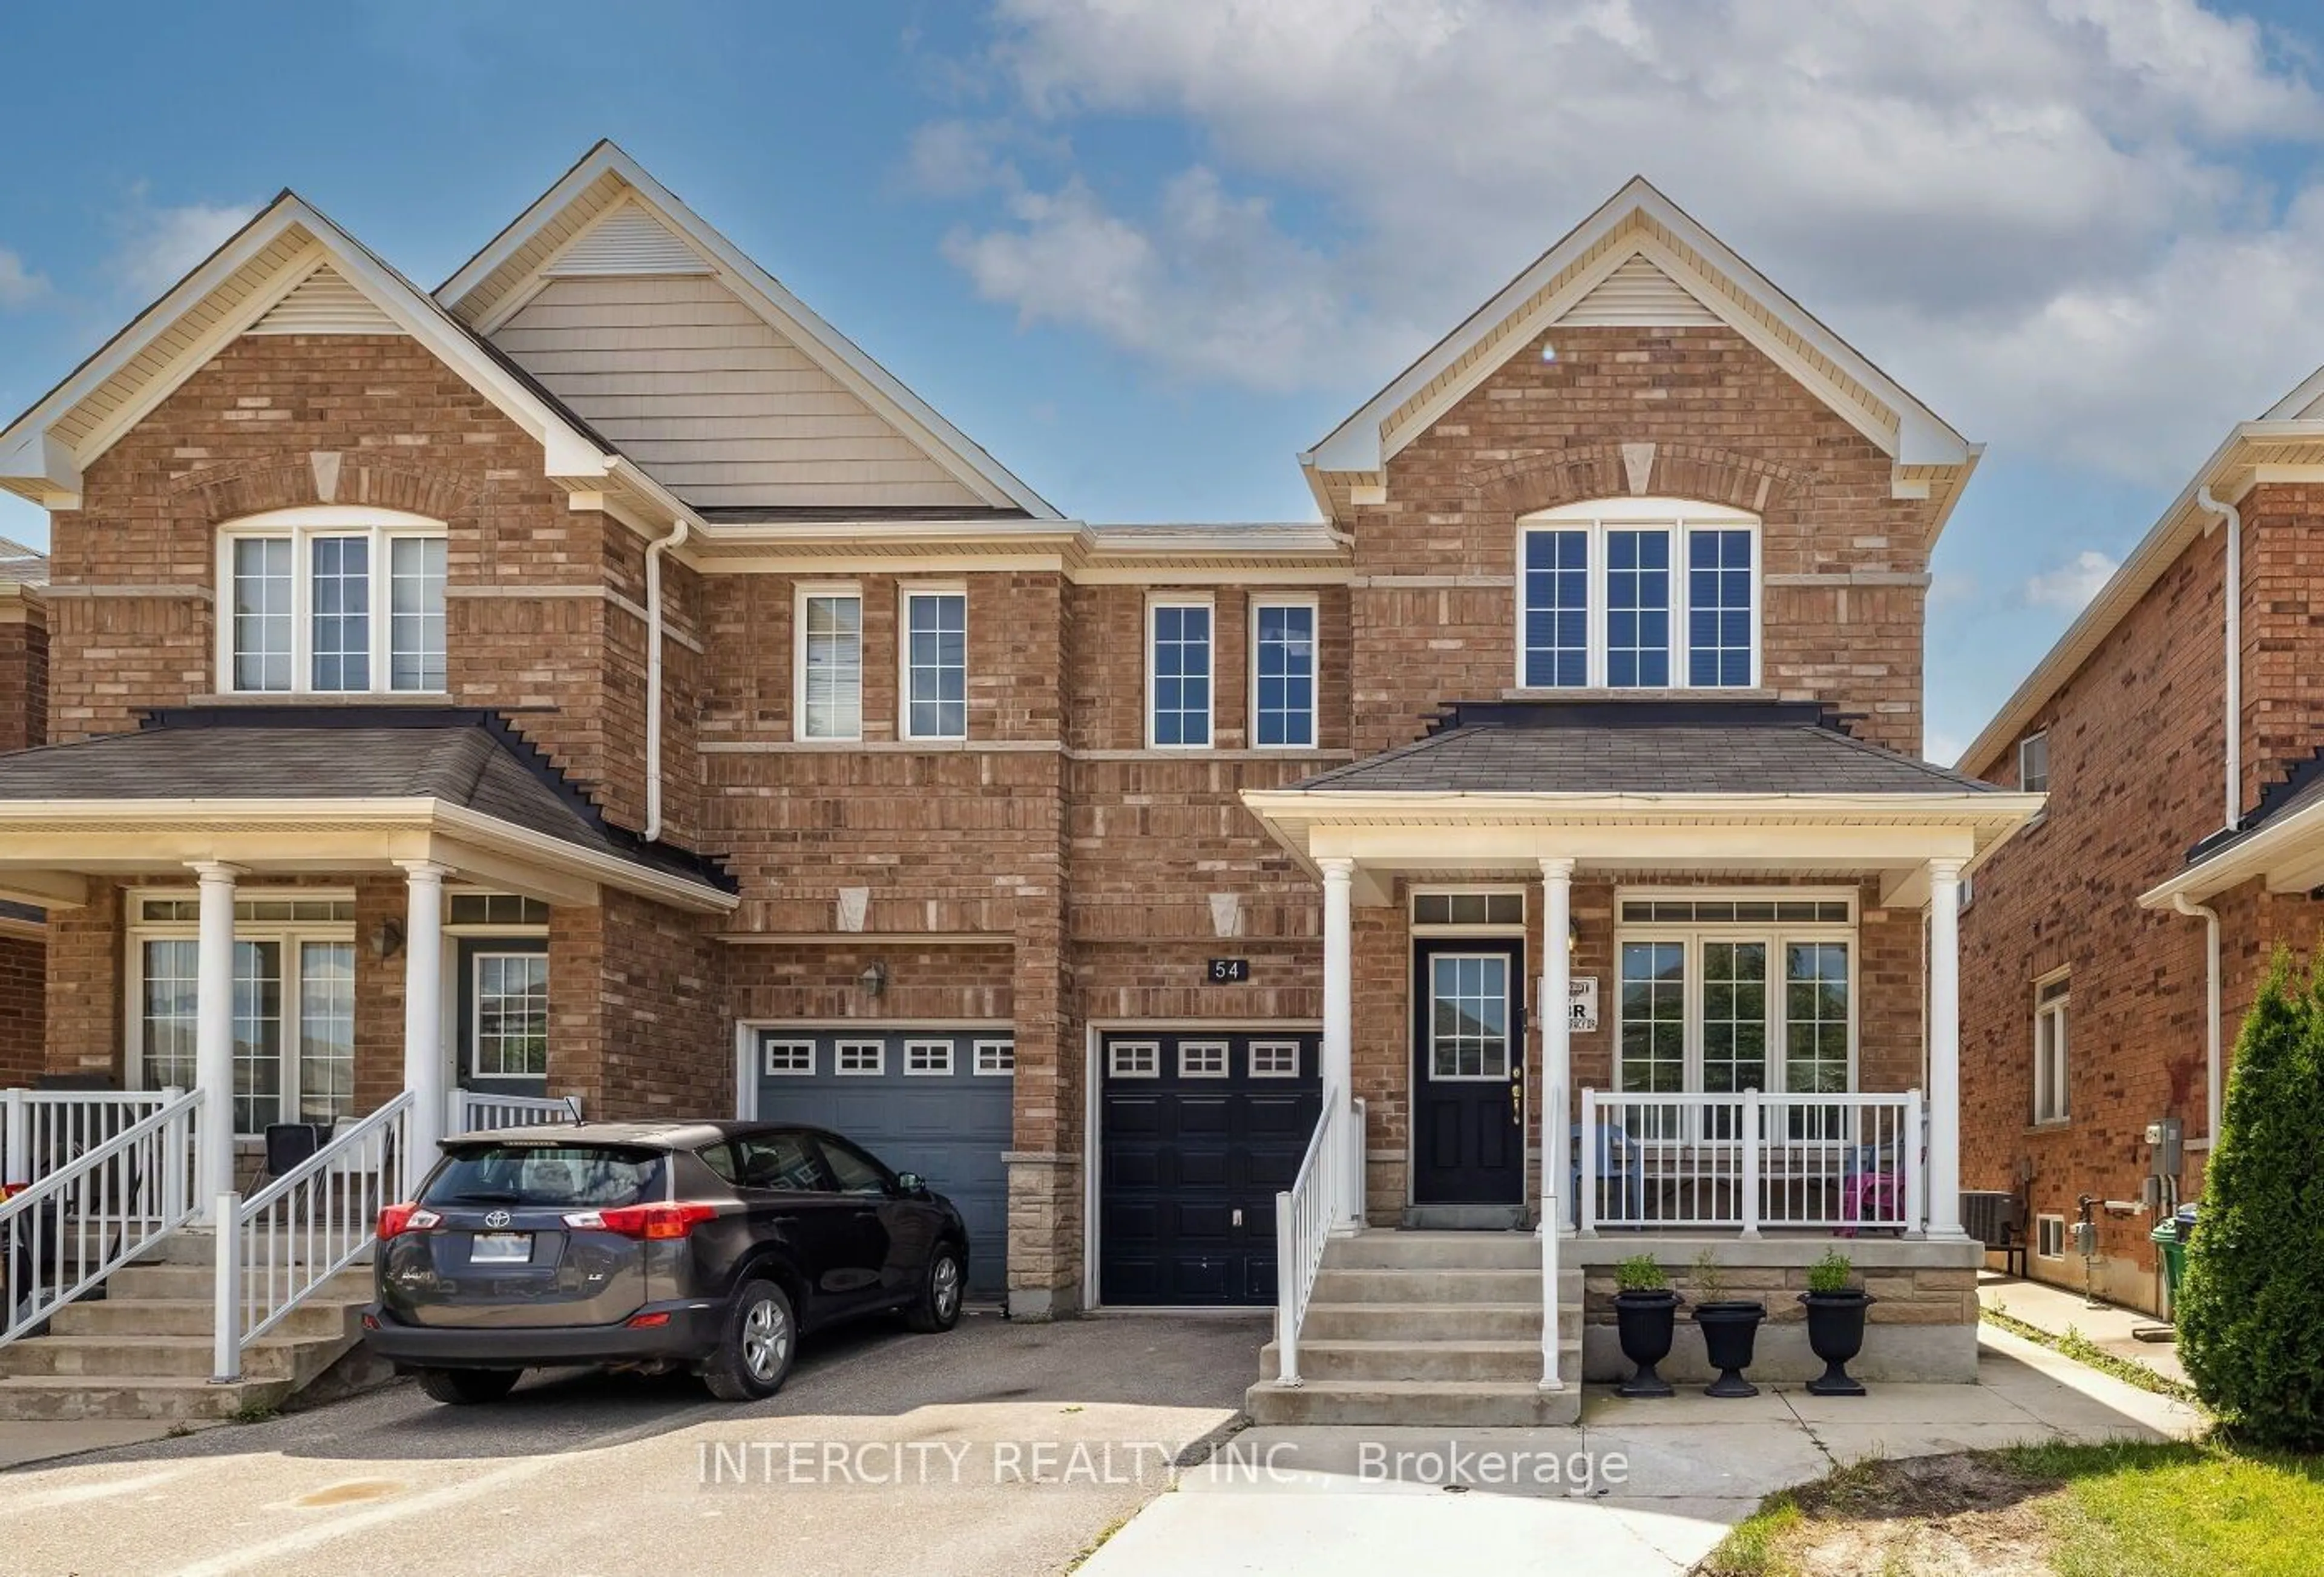 Home with brick exterior material for 54 Literacy Dr, Brampton Ontario L6P 3G3